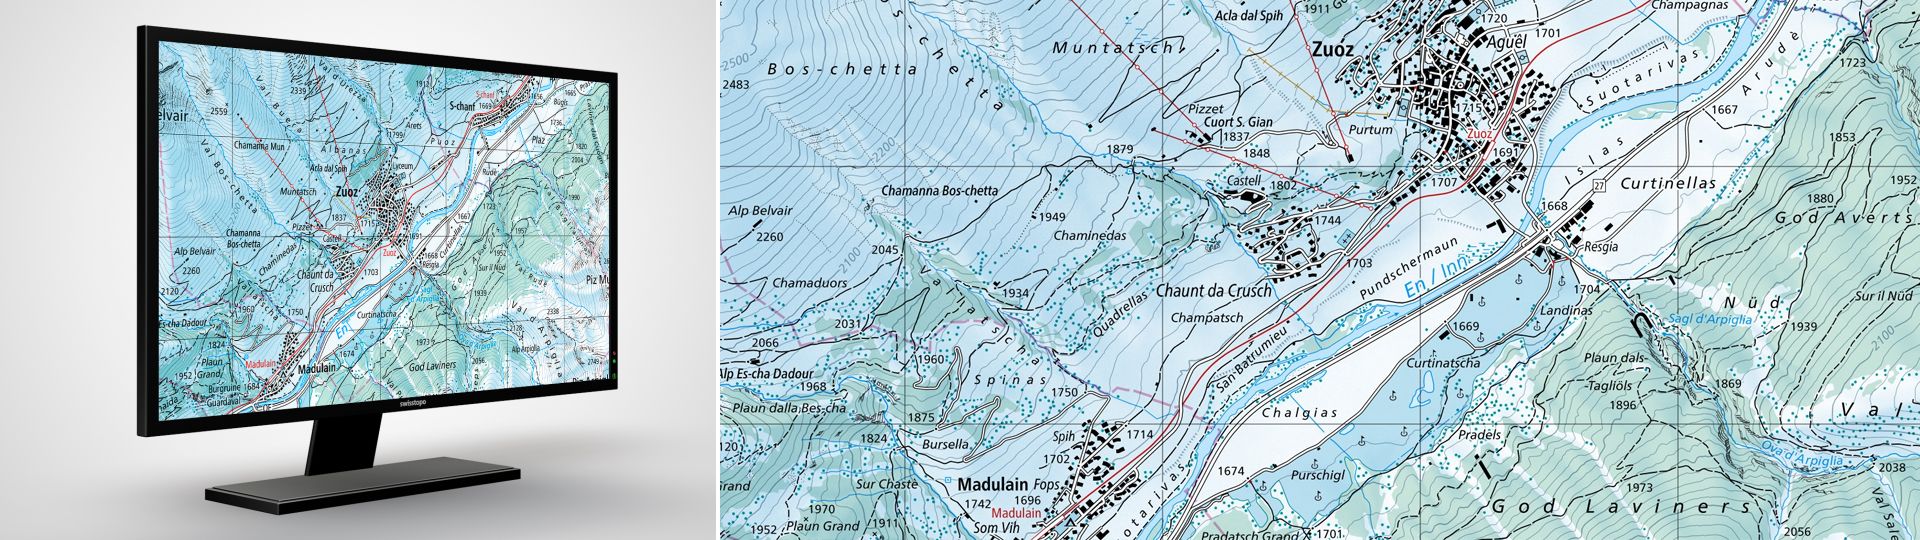 Swiss Map Raster Winter 50: Swiss Map Raster Winter 50 is the digital version of the national map 1:50,000 in winter representation and raster format. 